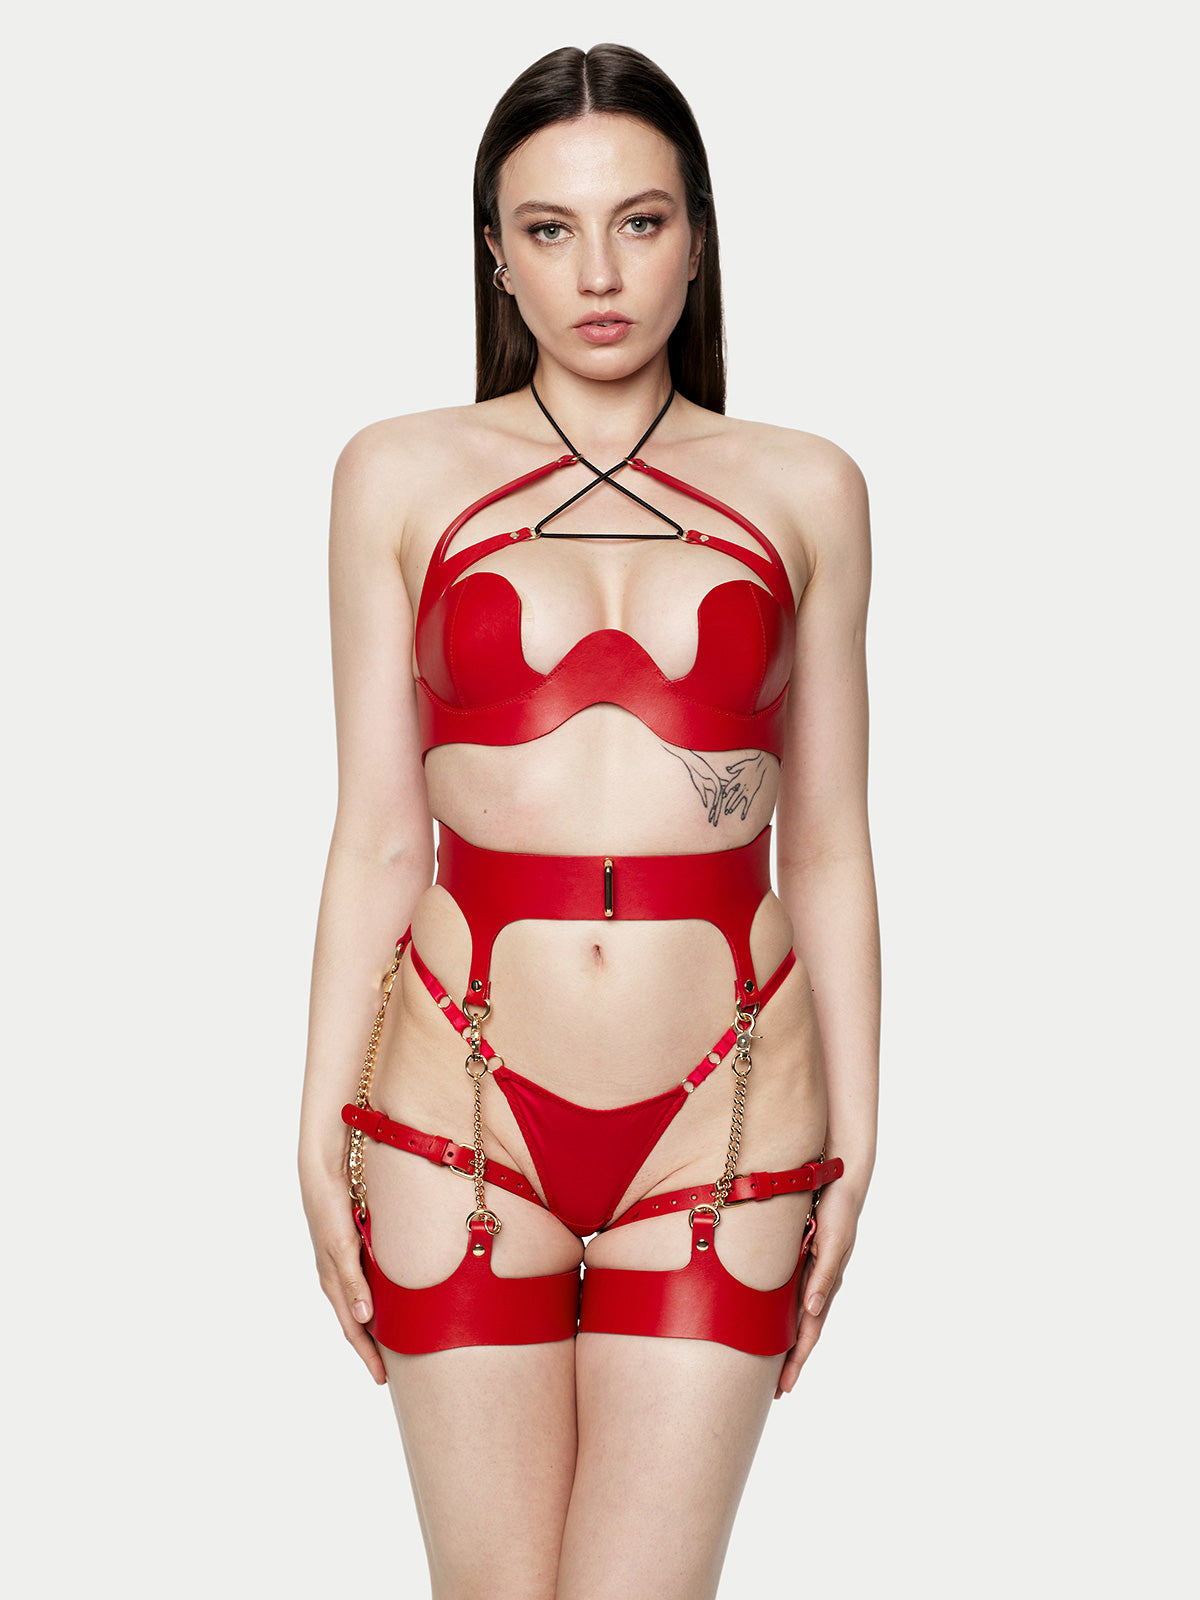 Doja Leather Garters and Bra Set in Red